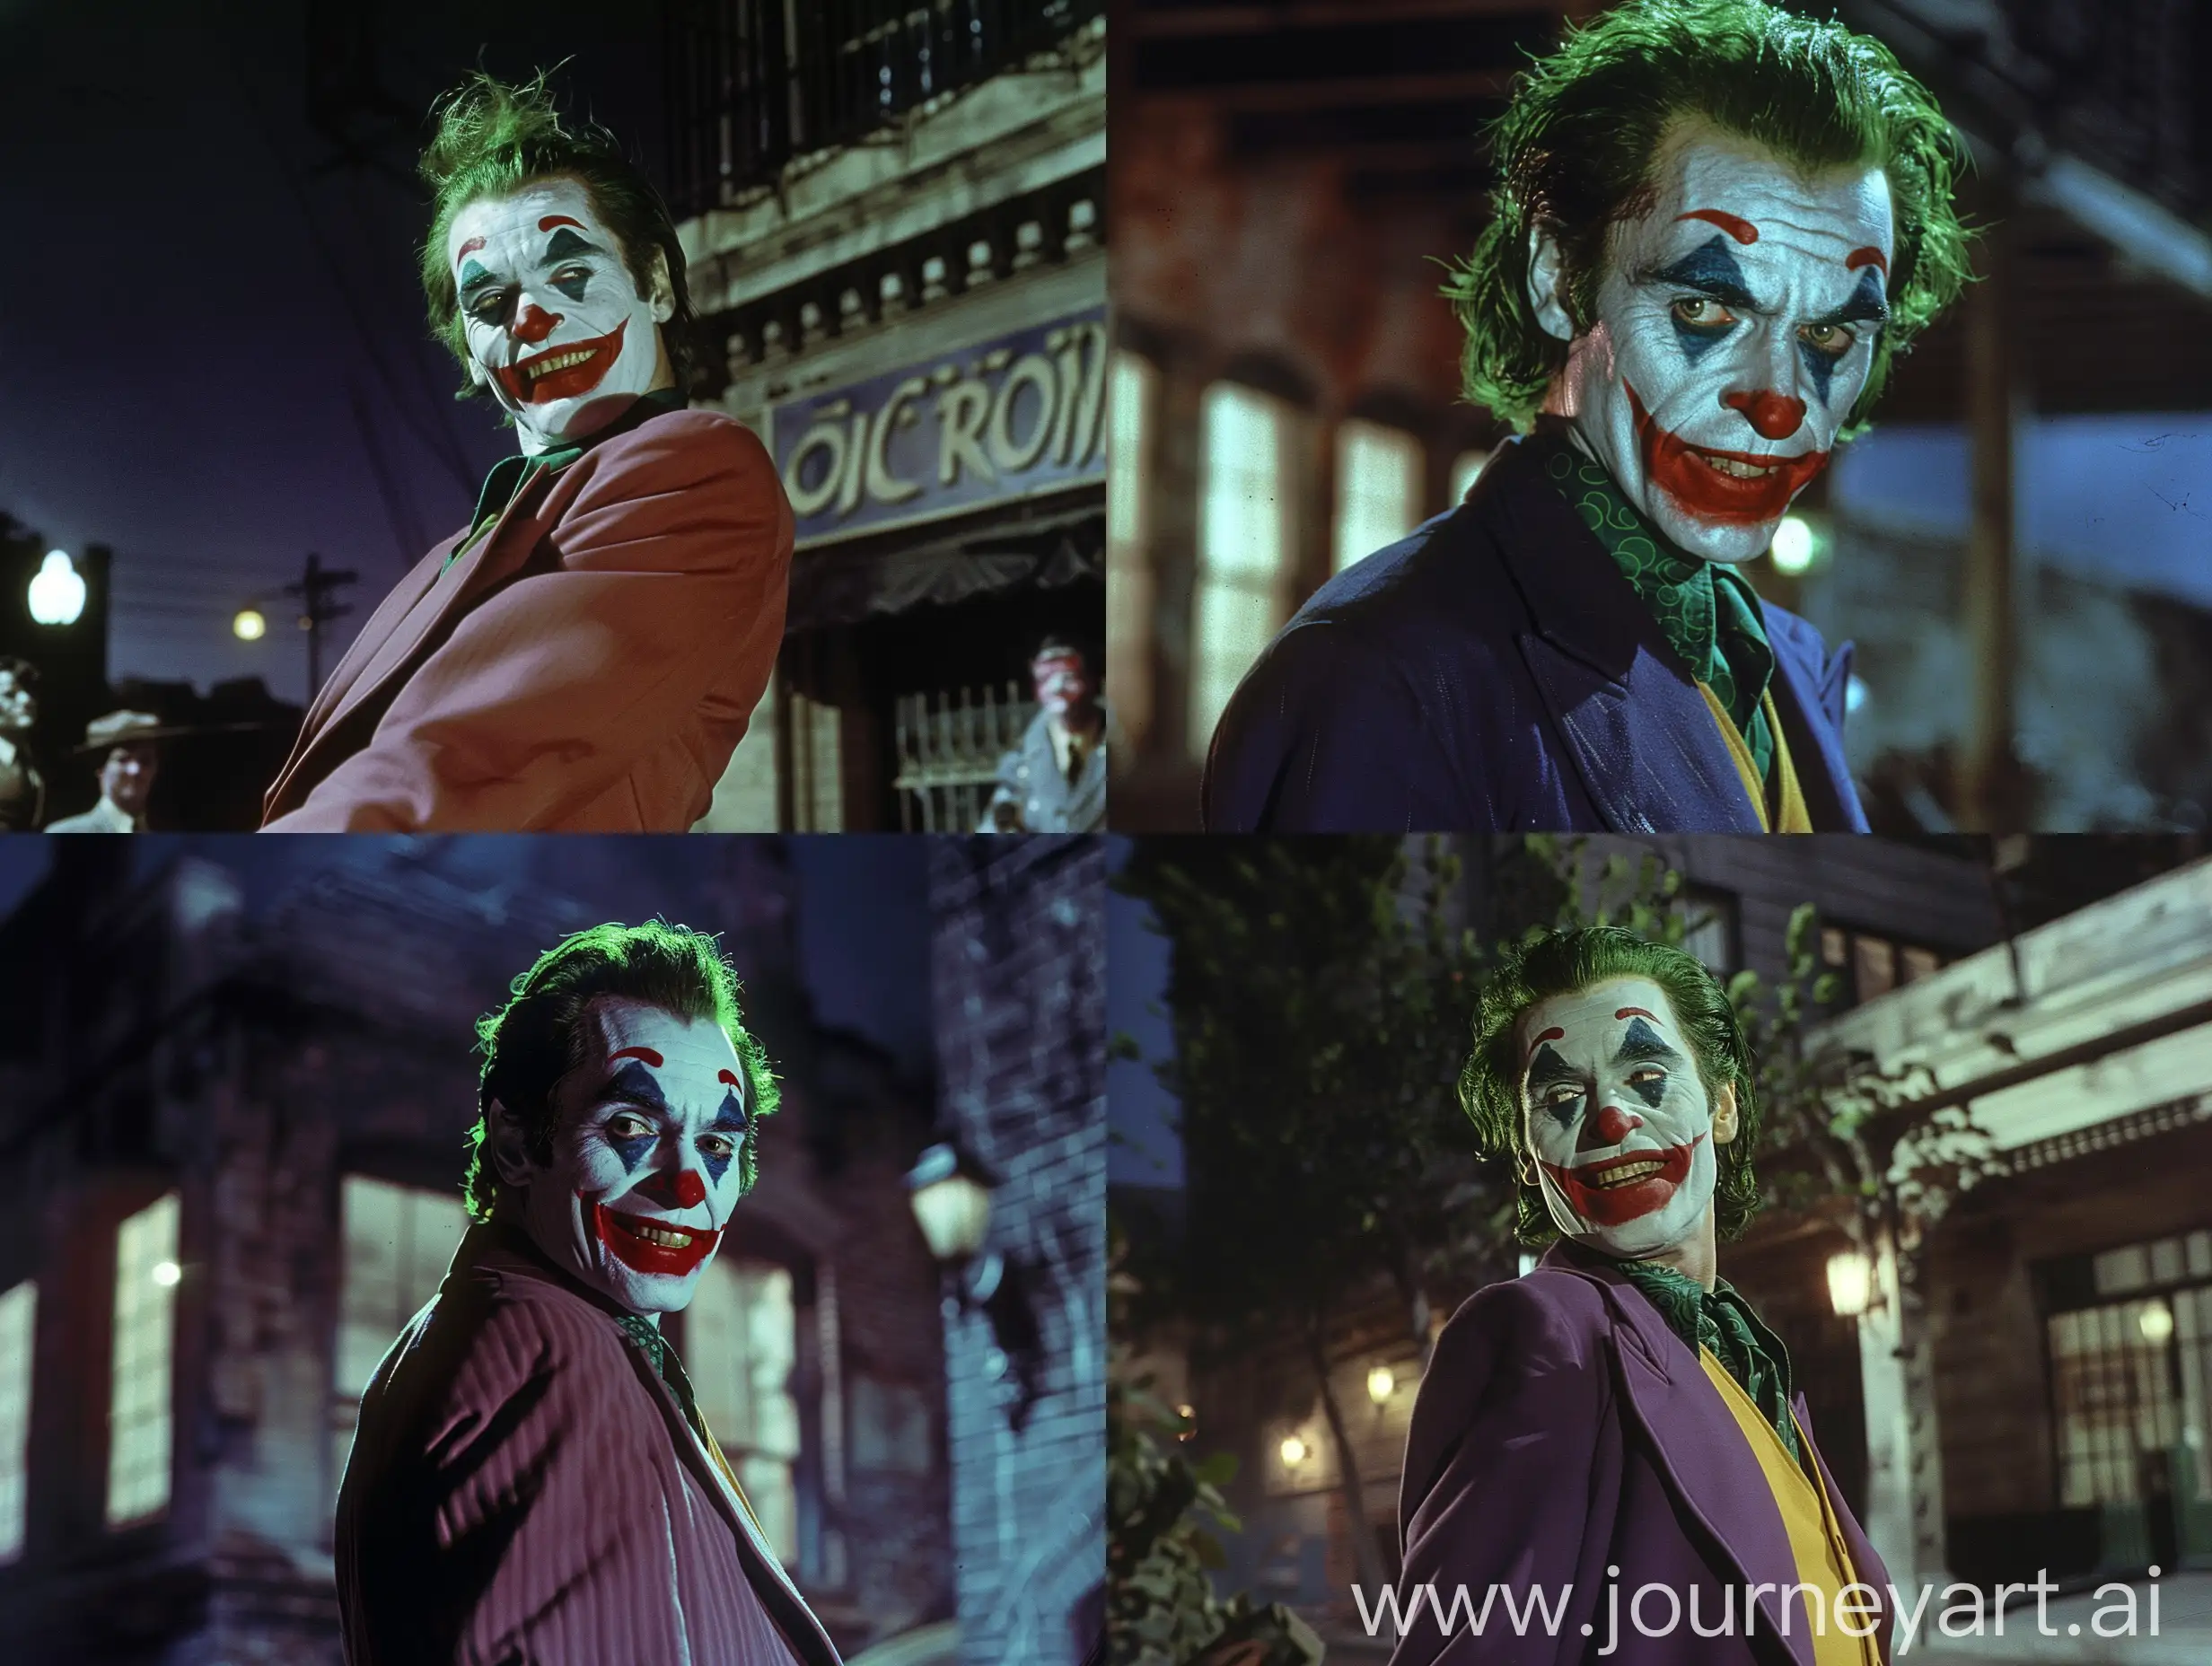 shot of the Joker,at night,1950's super panavision 70,colory image